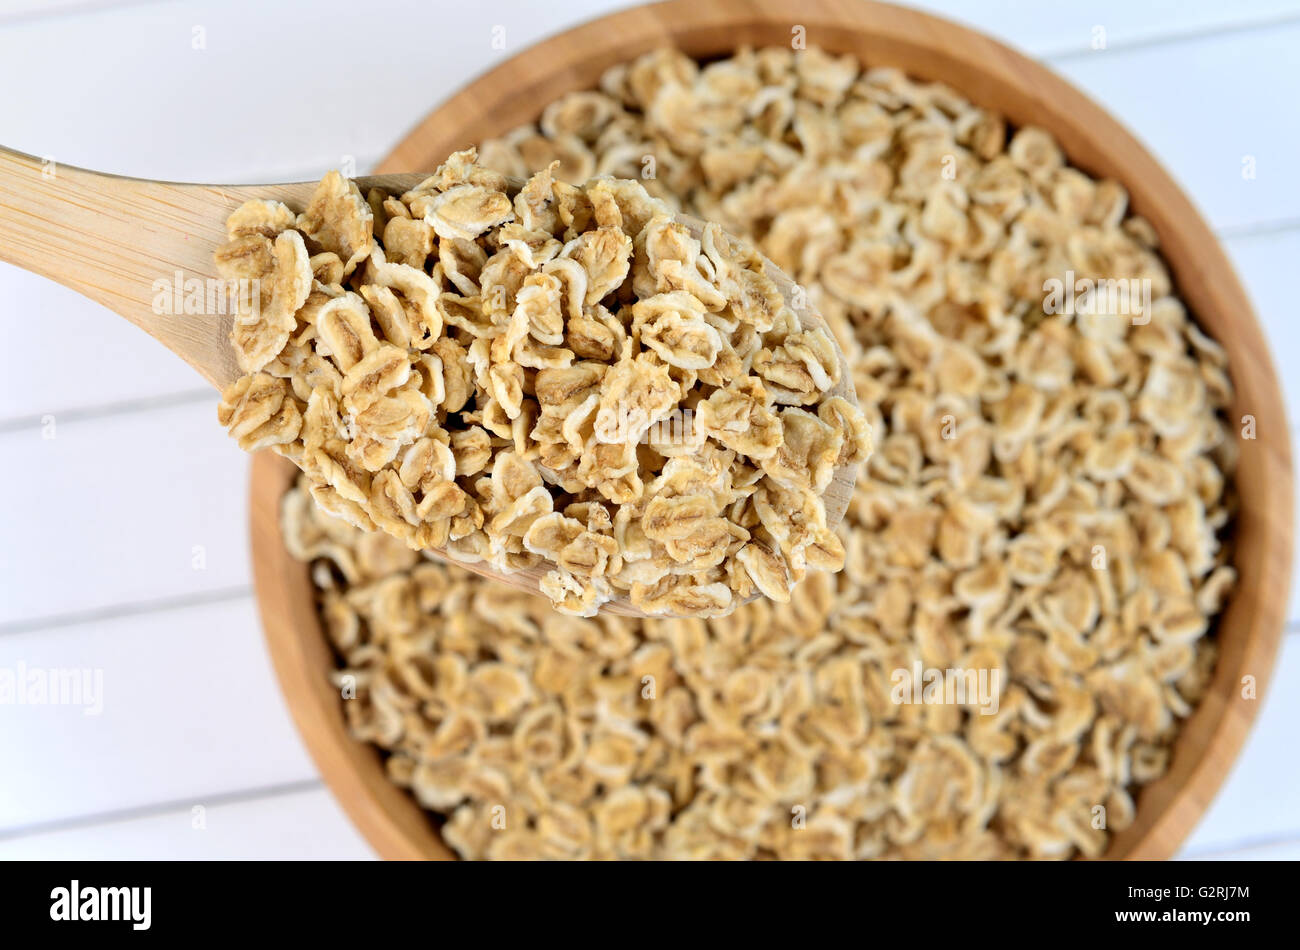 Wooden spoon with oats on white table Stock Photo